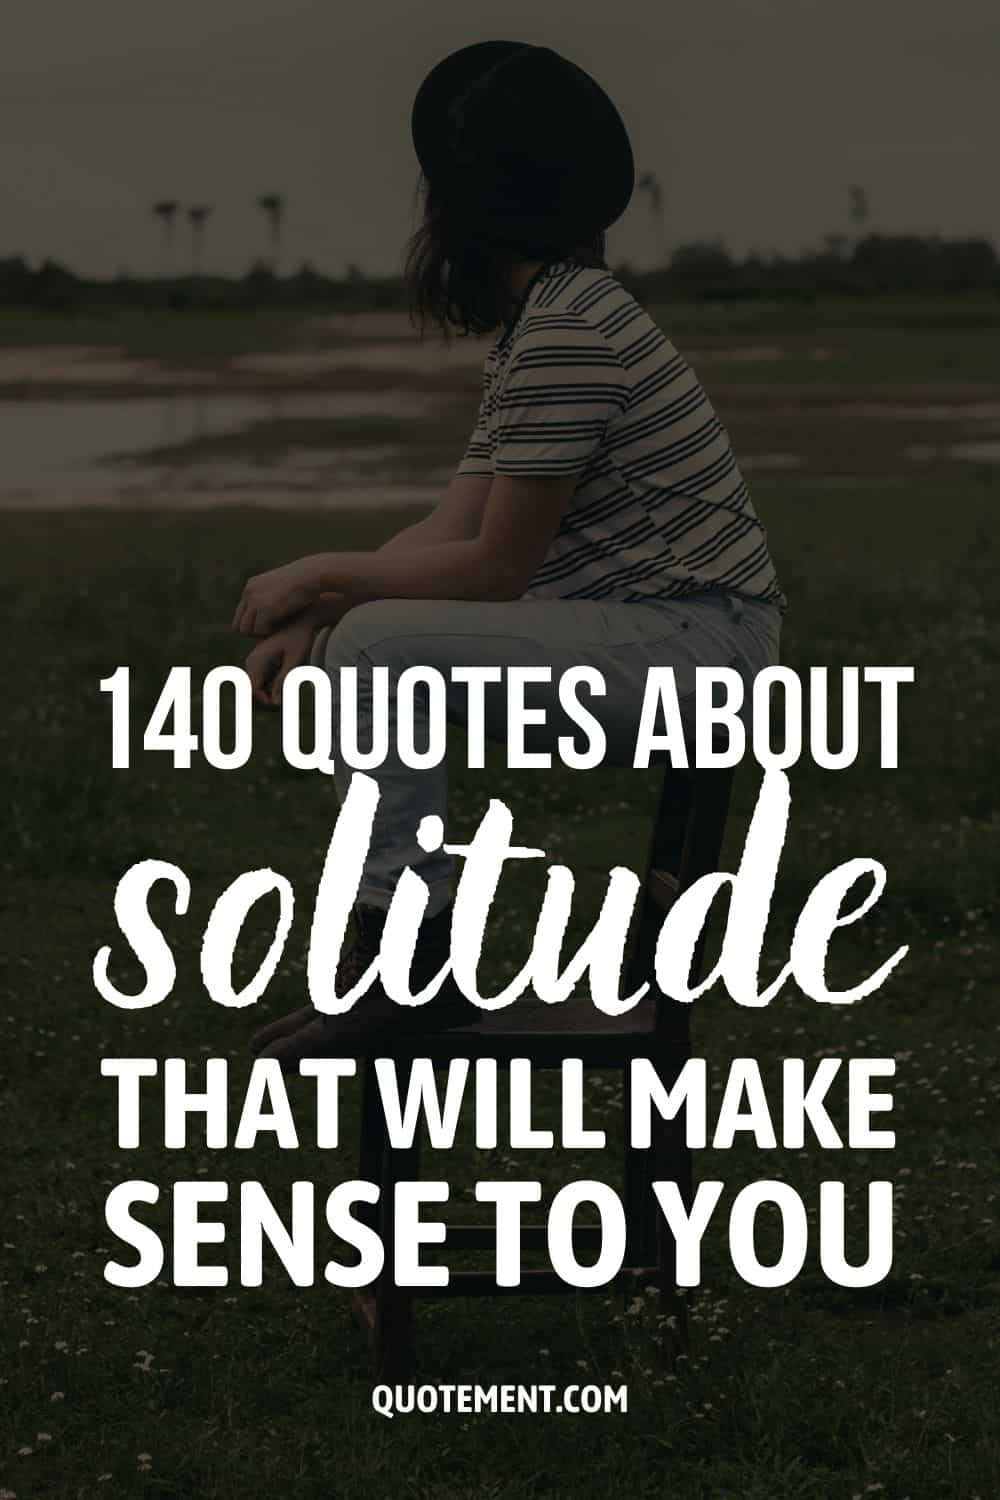 140 Quotes About Solitude That Will Make Sense To You